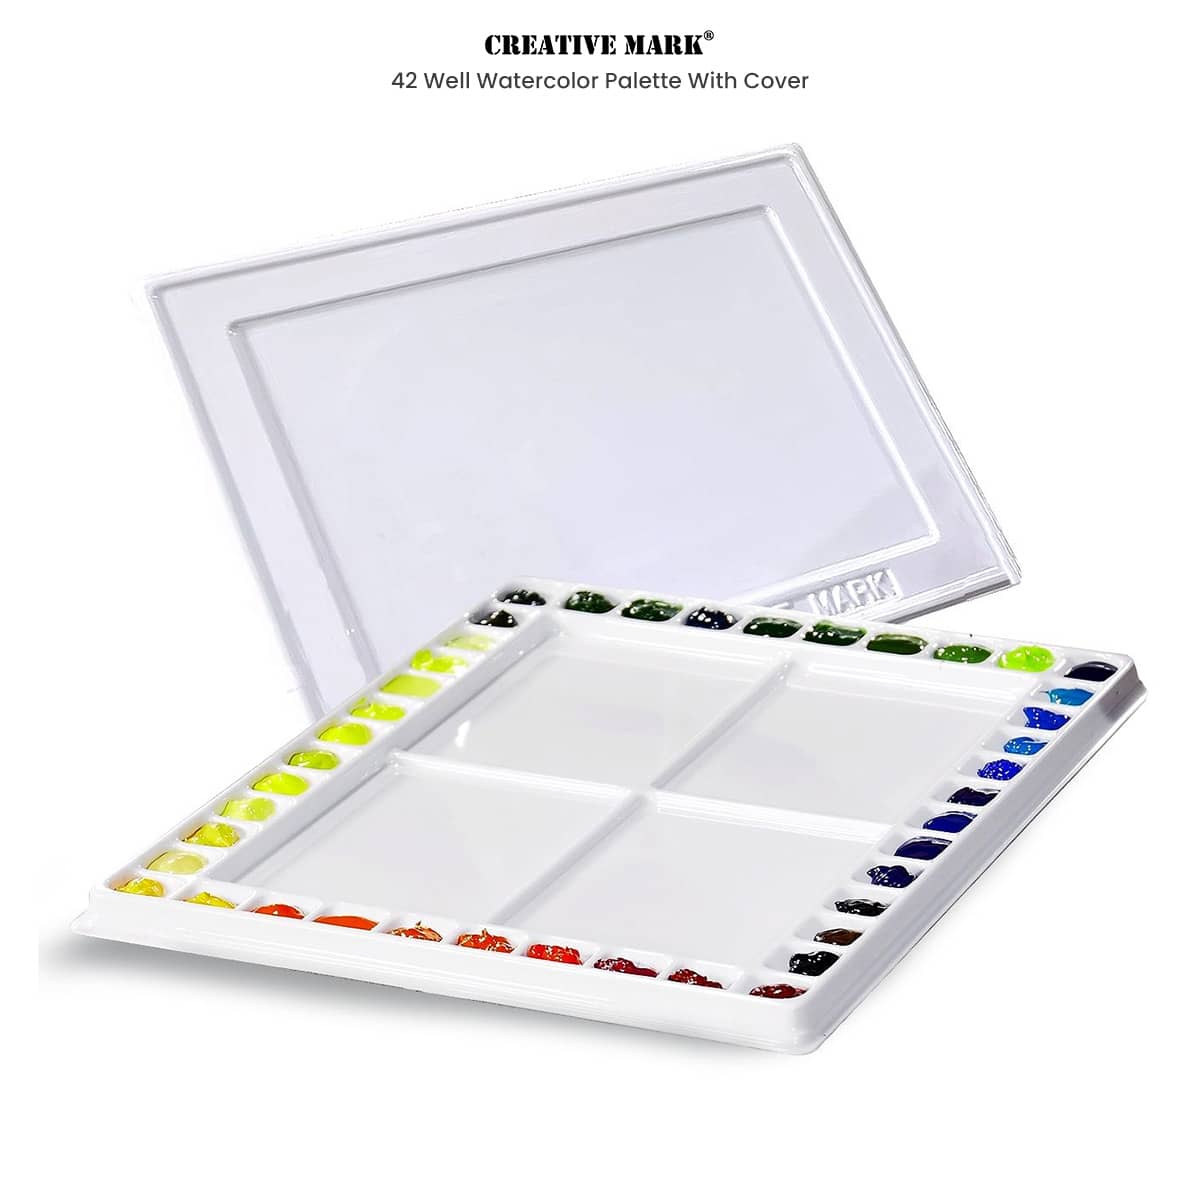 Empty Watercolor Palette with Lid, 12+8 Half Pans Fold-Out Palette by  DUGATO, 4 Mixing Area, Metal Tin Box for Watercolor Acrylic Oil DIY Travel  Art Supplies (Small)